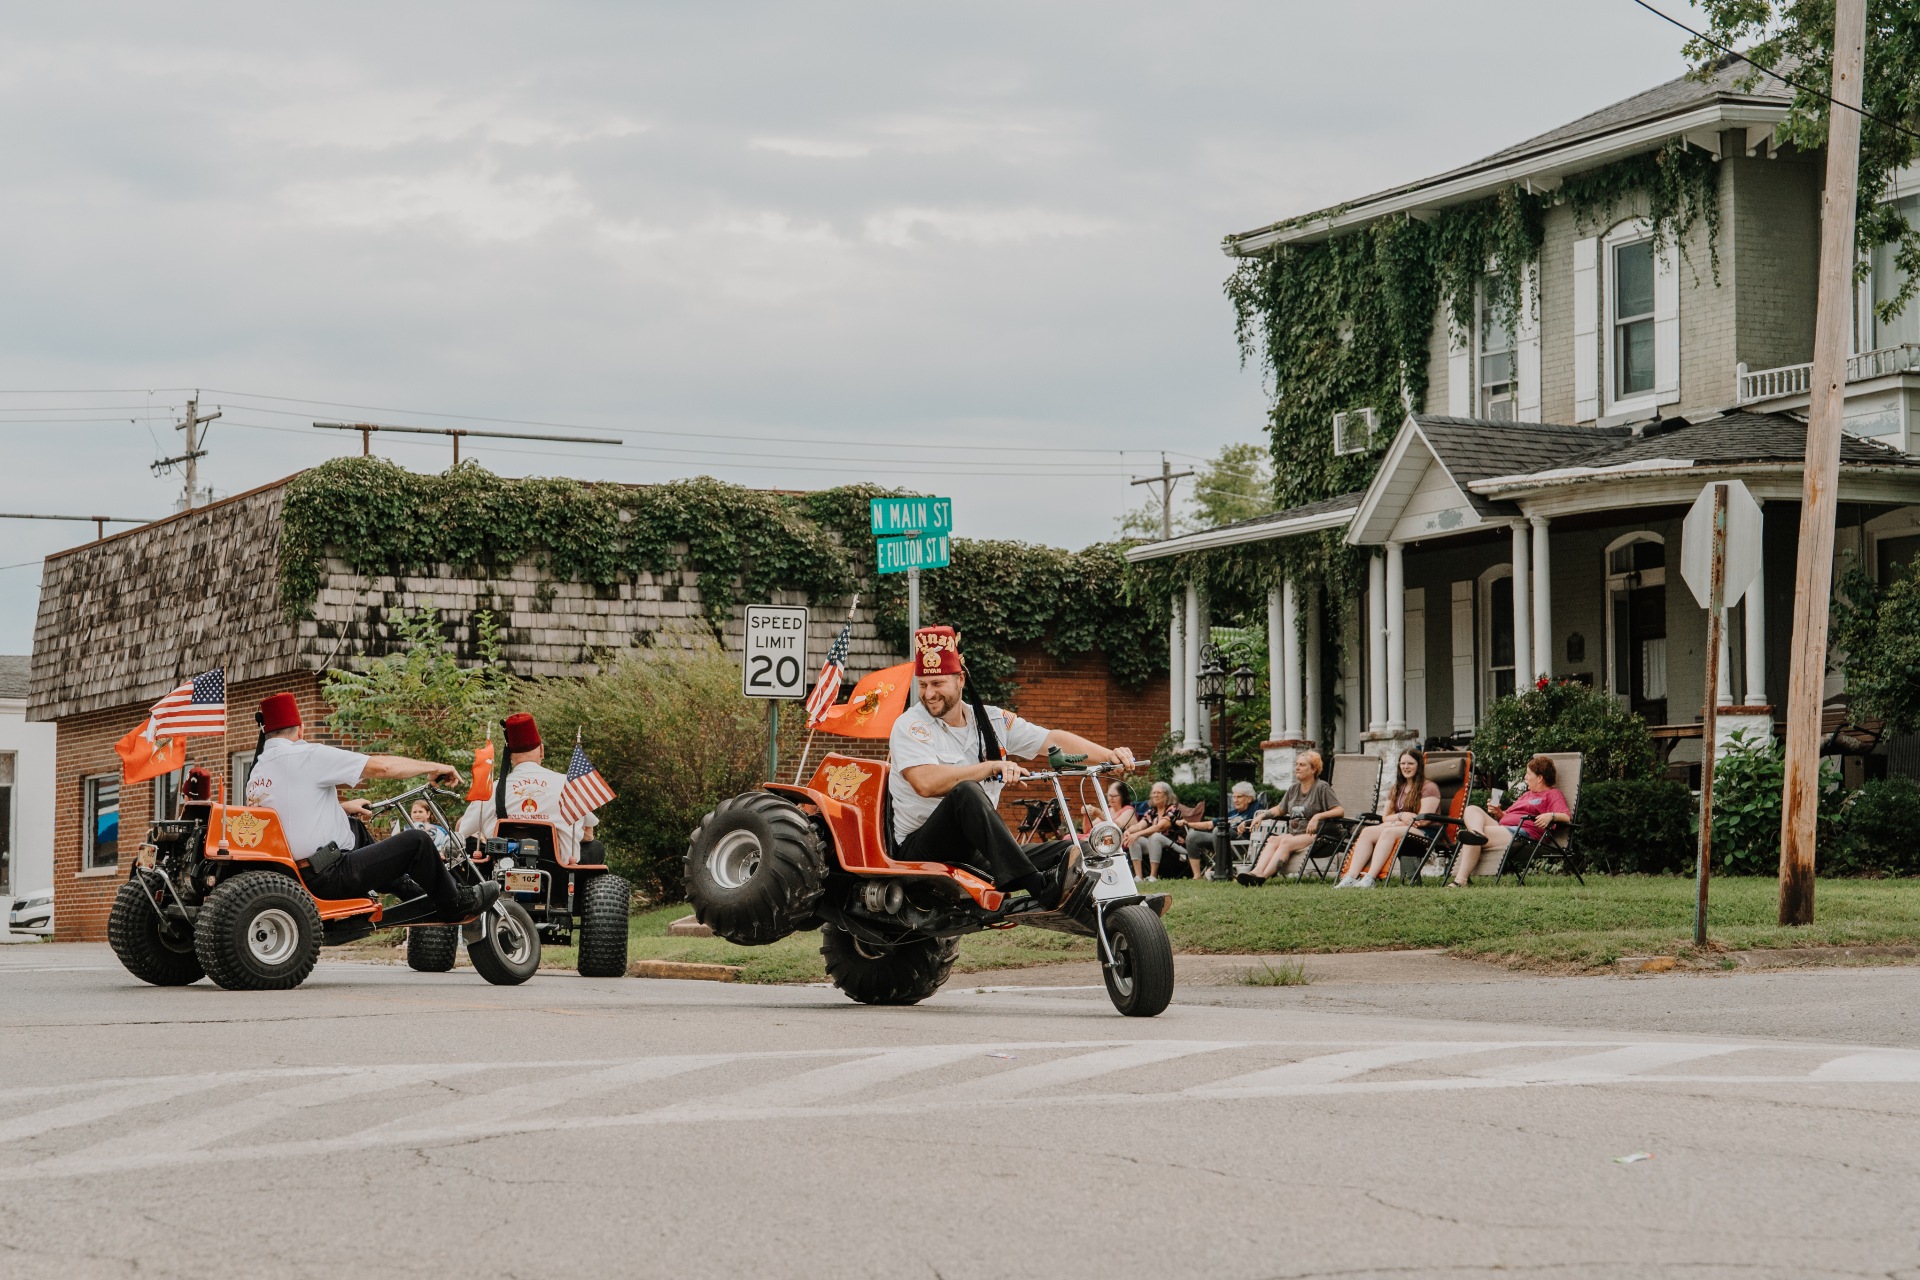 Men ride ATV bikes down a residential street as people watch from the lawn